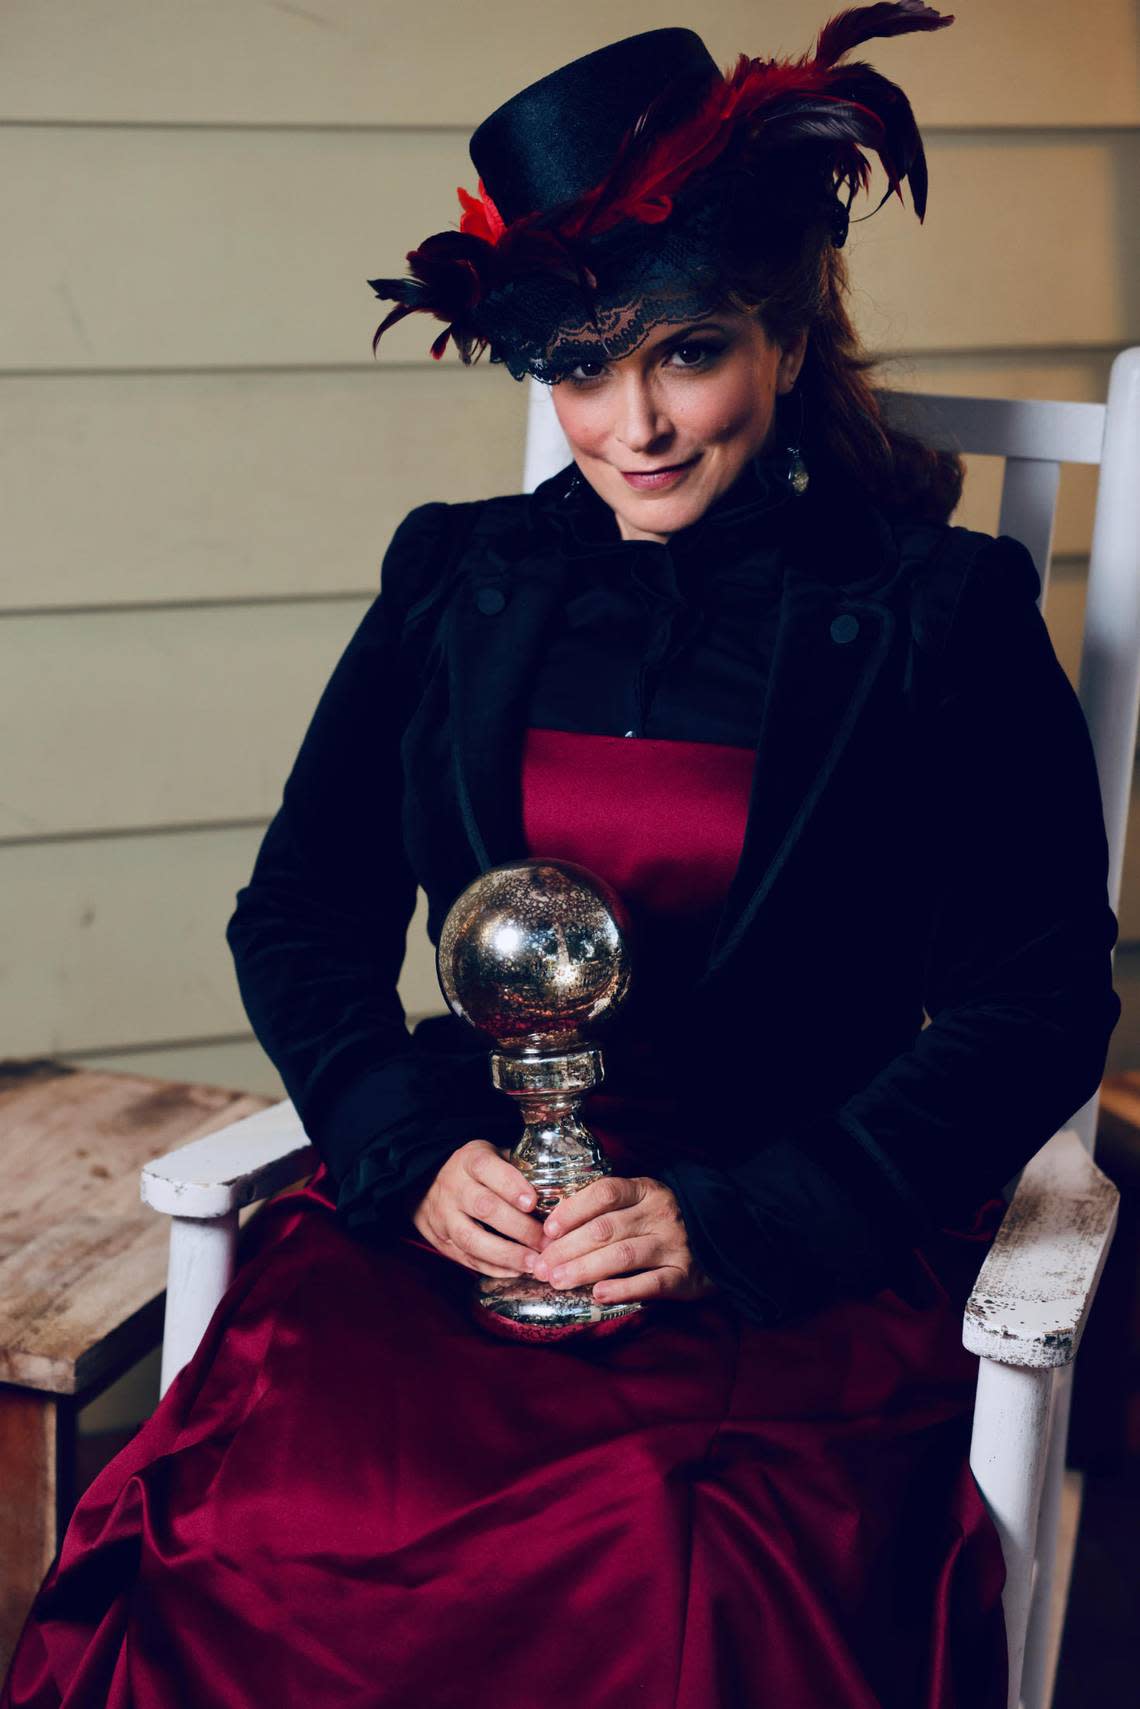 Katherine Loflin, a Cary resident, has created the History that Haunts Cary Trolley Tour, which will take guests to visit the homes and sites in Cary with documented accounts of paranormal activity.